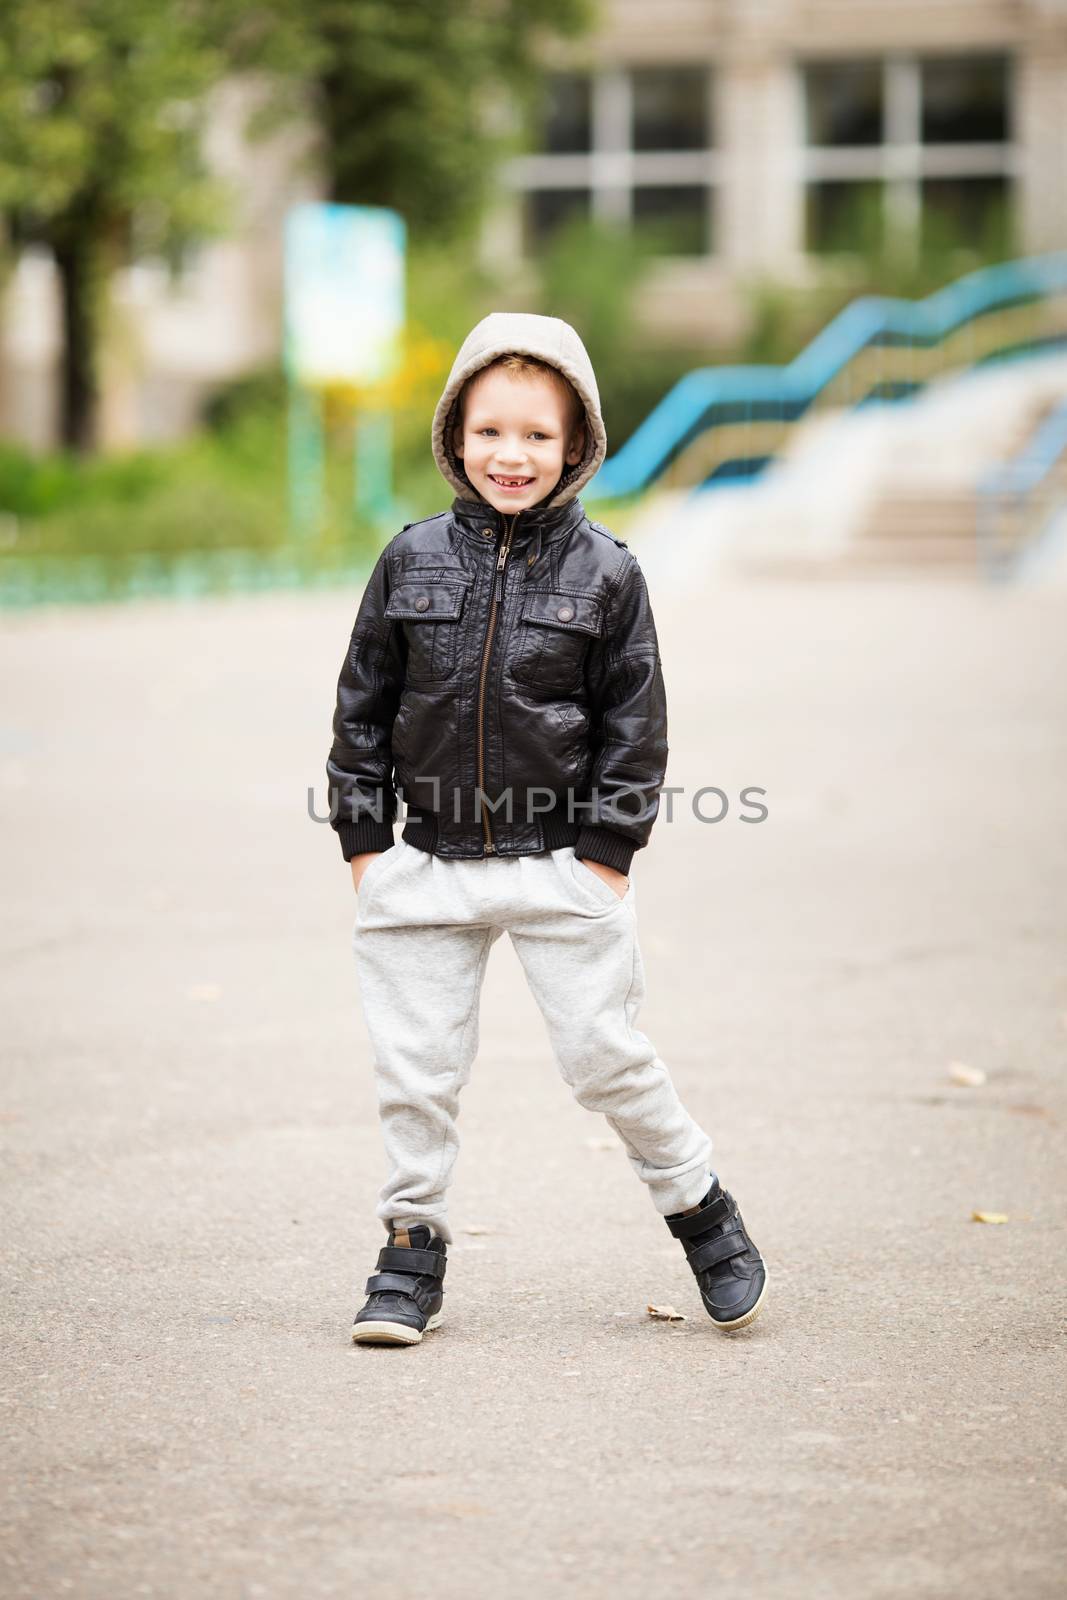 Full-length portrait of adorable little boy wearing black leather jacket. Urban kids. Hands in pockets. Loss of primary teeth in children.